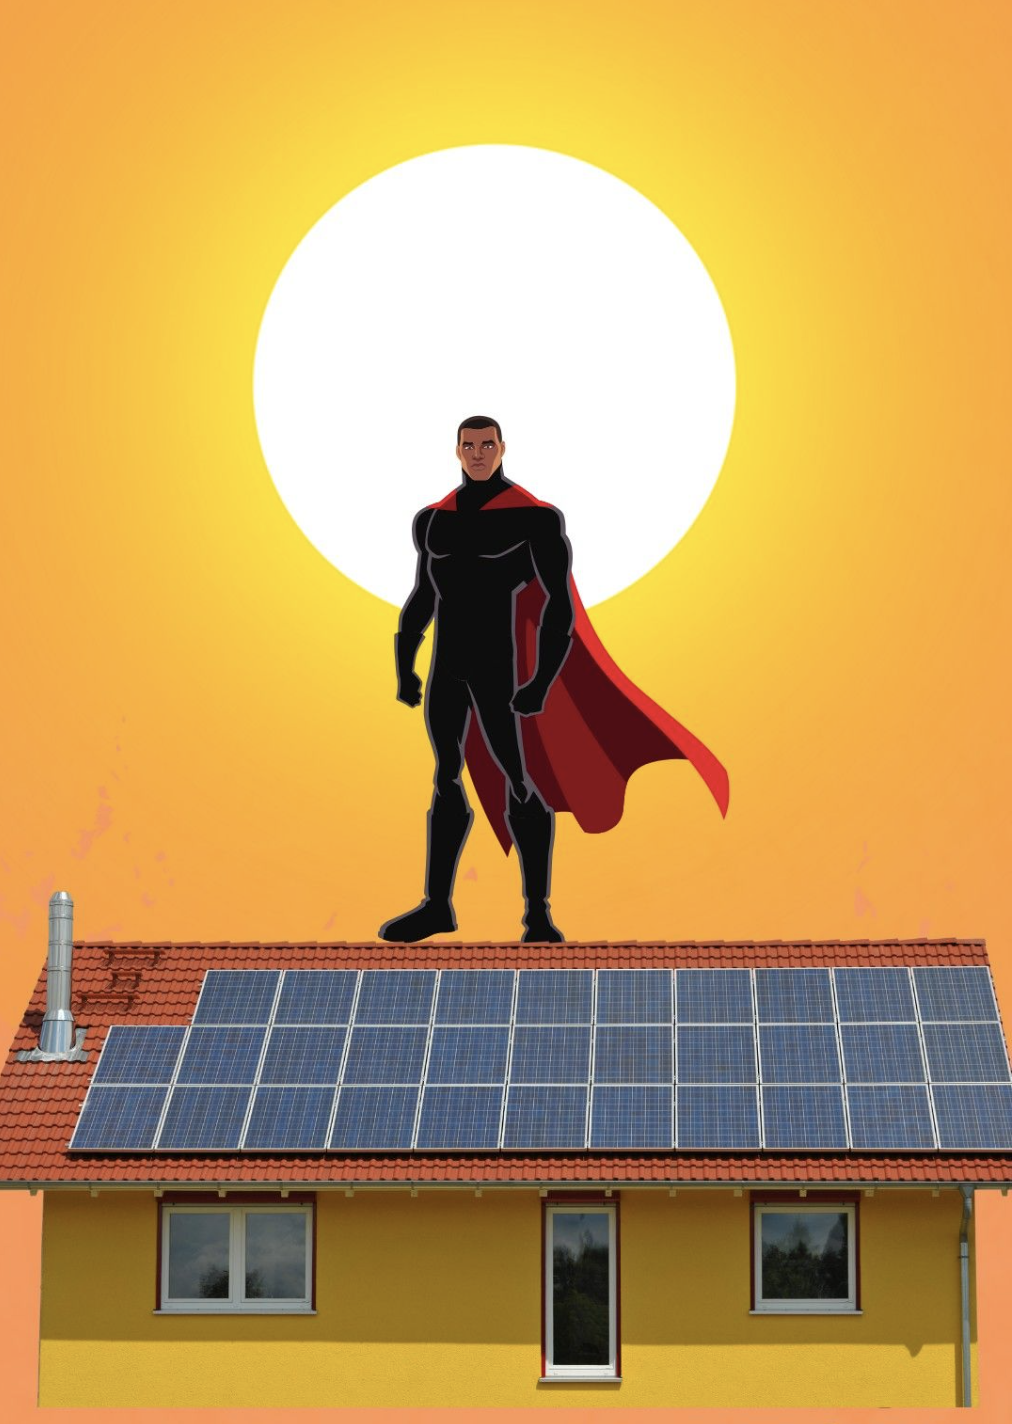 So You Bought An EV & Solar Panels: Are You A Climate Hero?